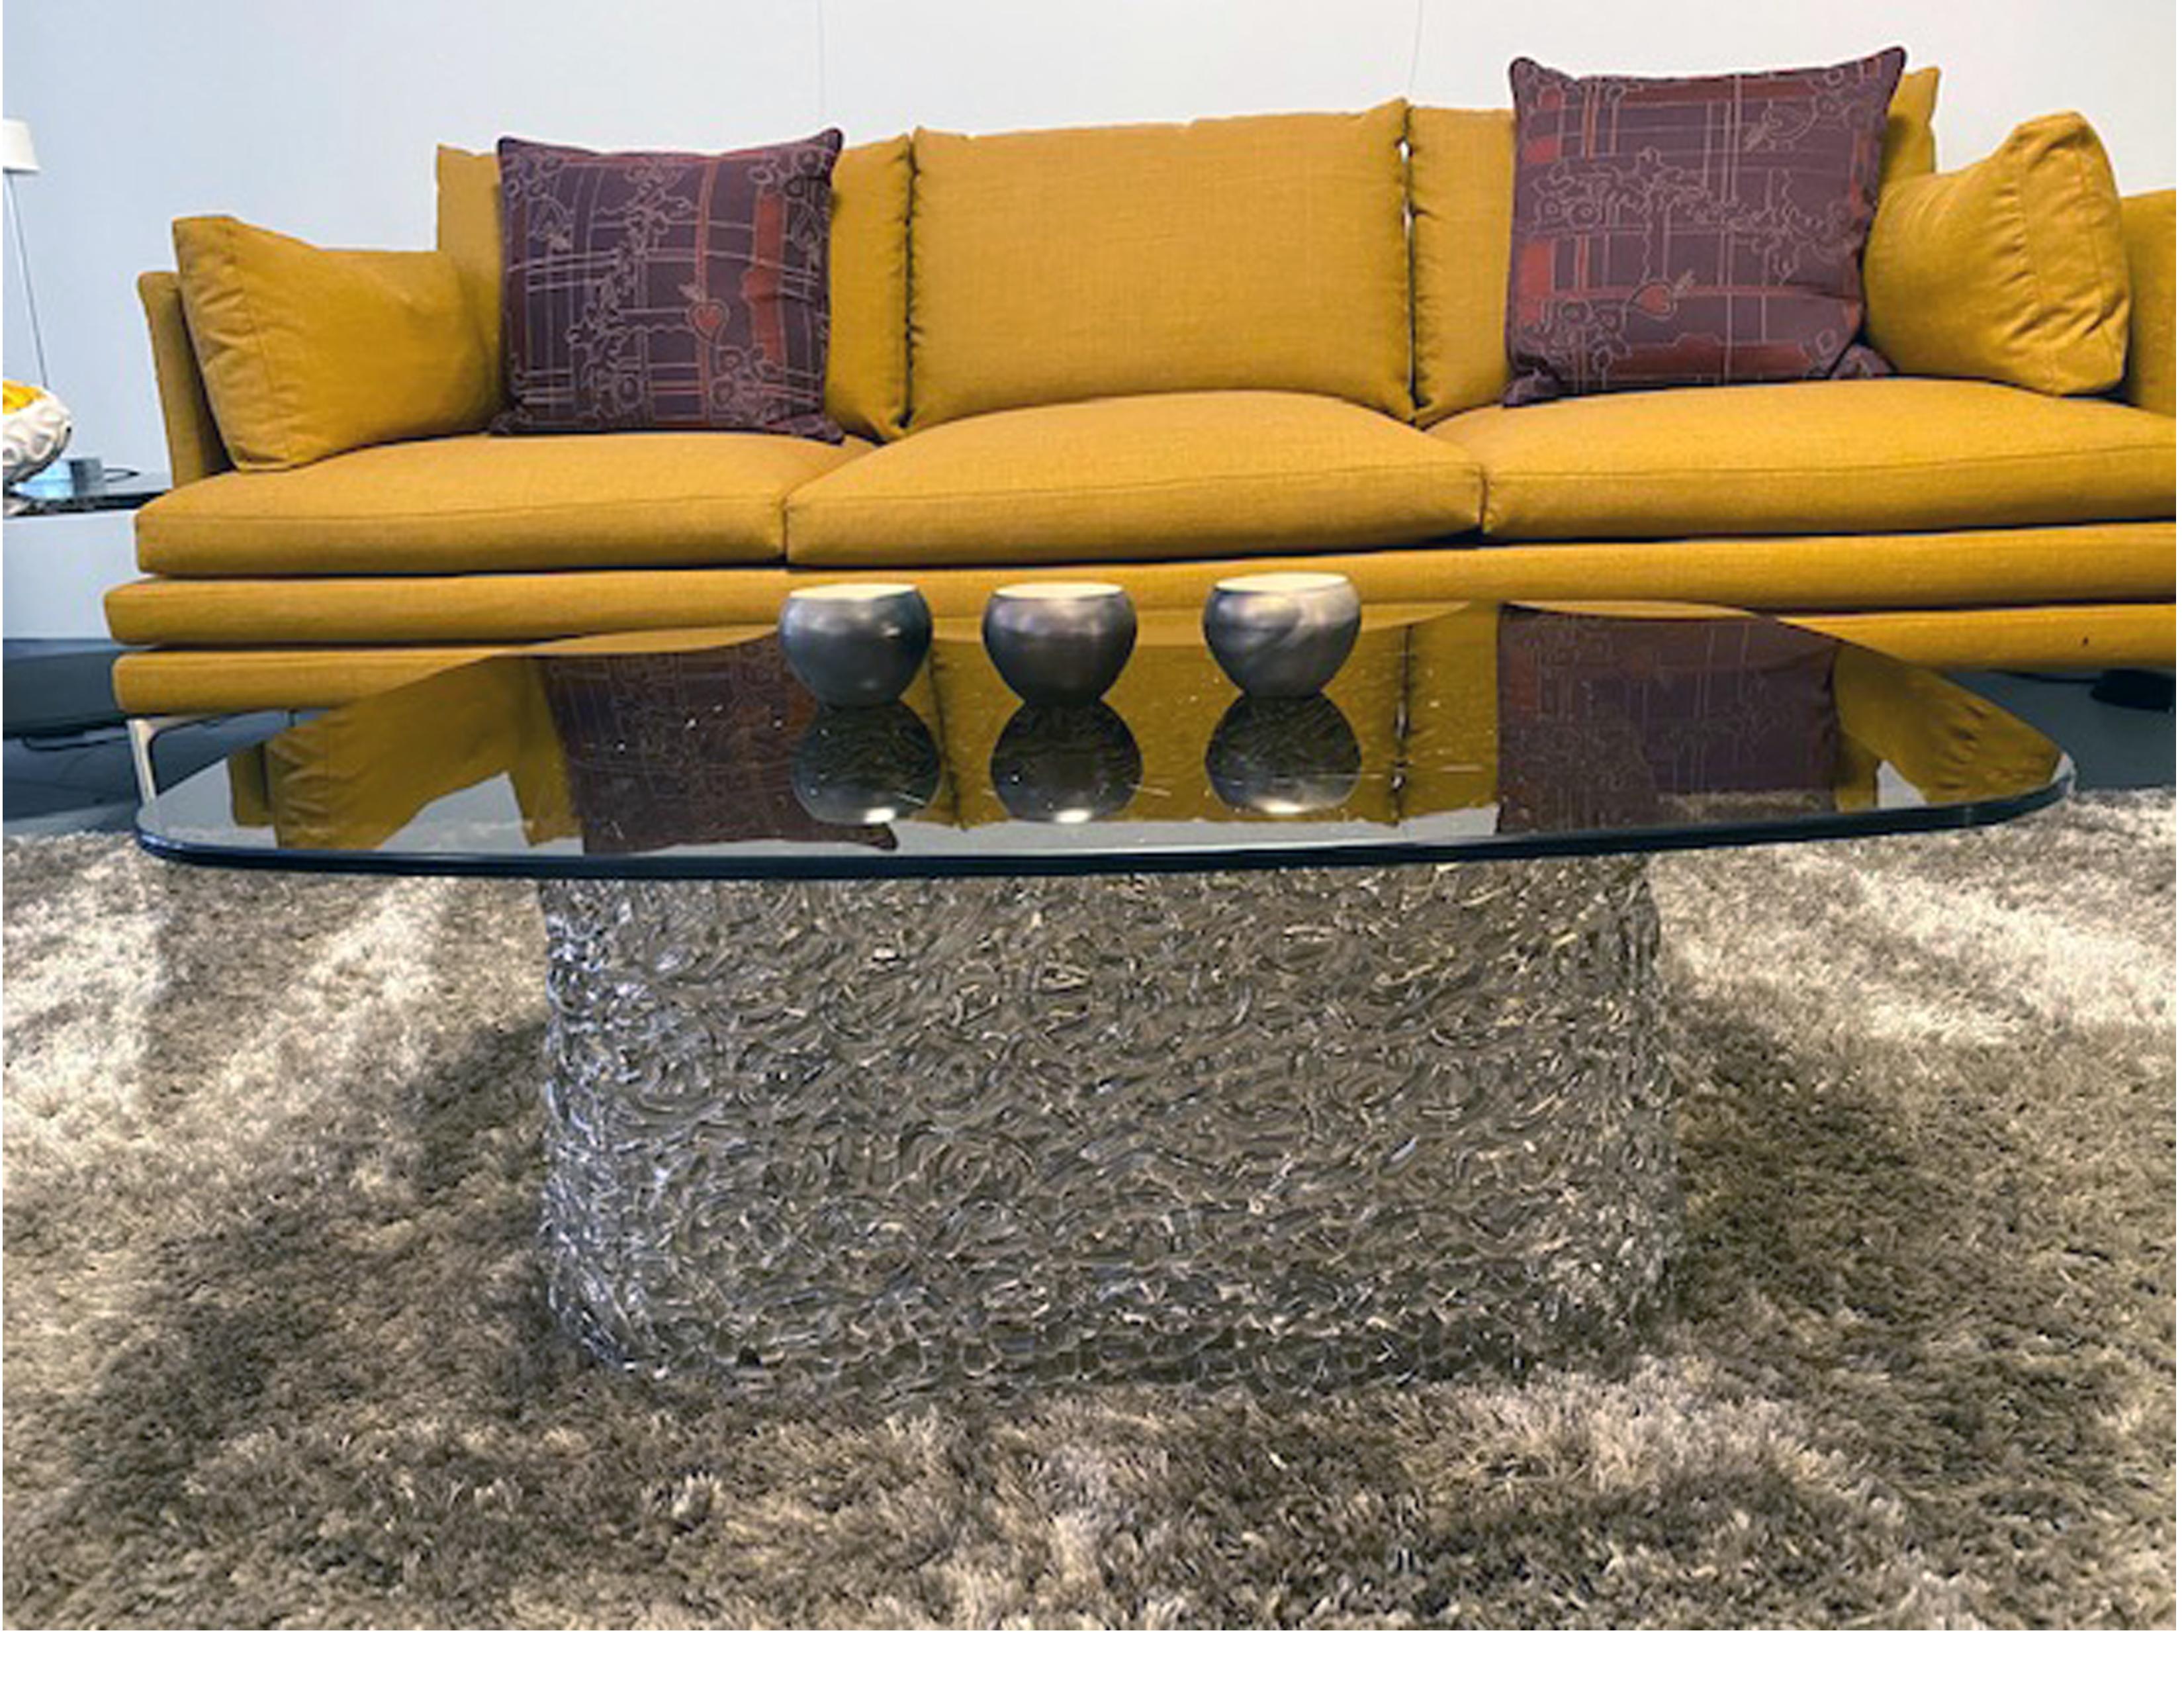 Macrame coffee table bronze
comprising hand-interwoven spun glass base and 10 mm-thick glass top. The coffee table collection includes the following finishes: extralight glass top with extralight glass base; bronze glass top with bronze painted